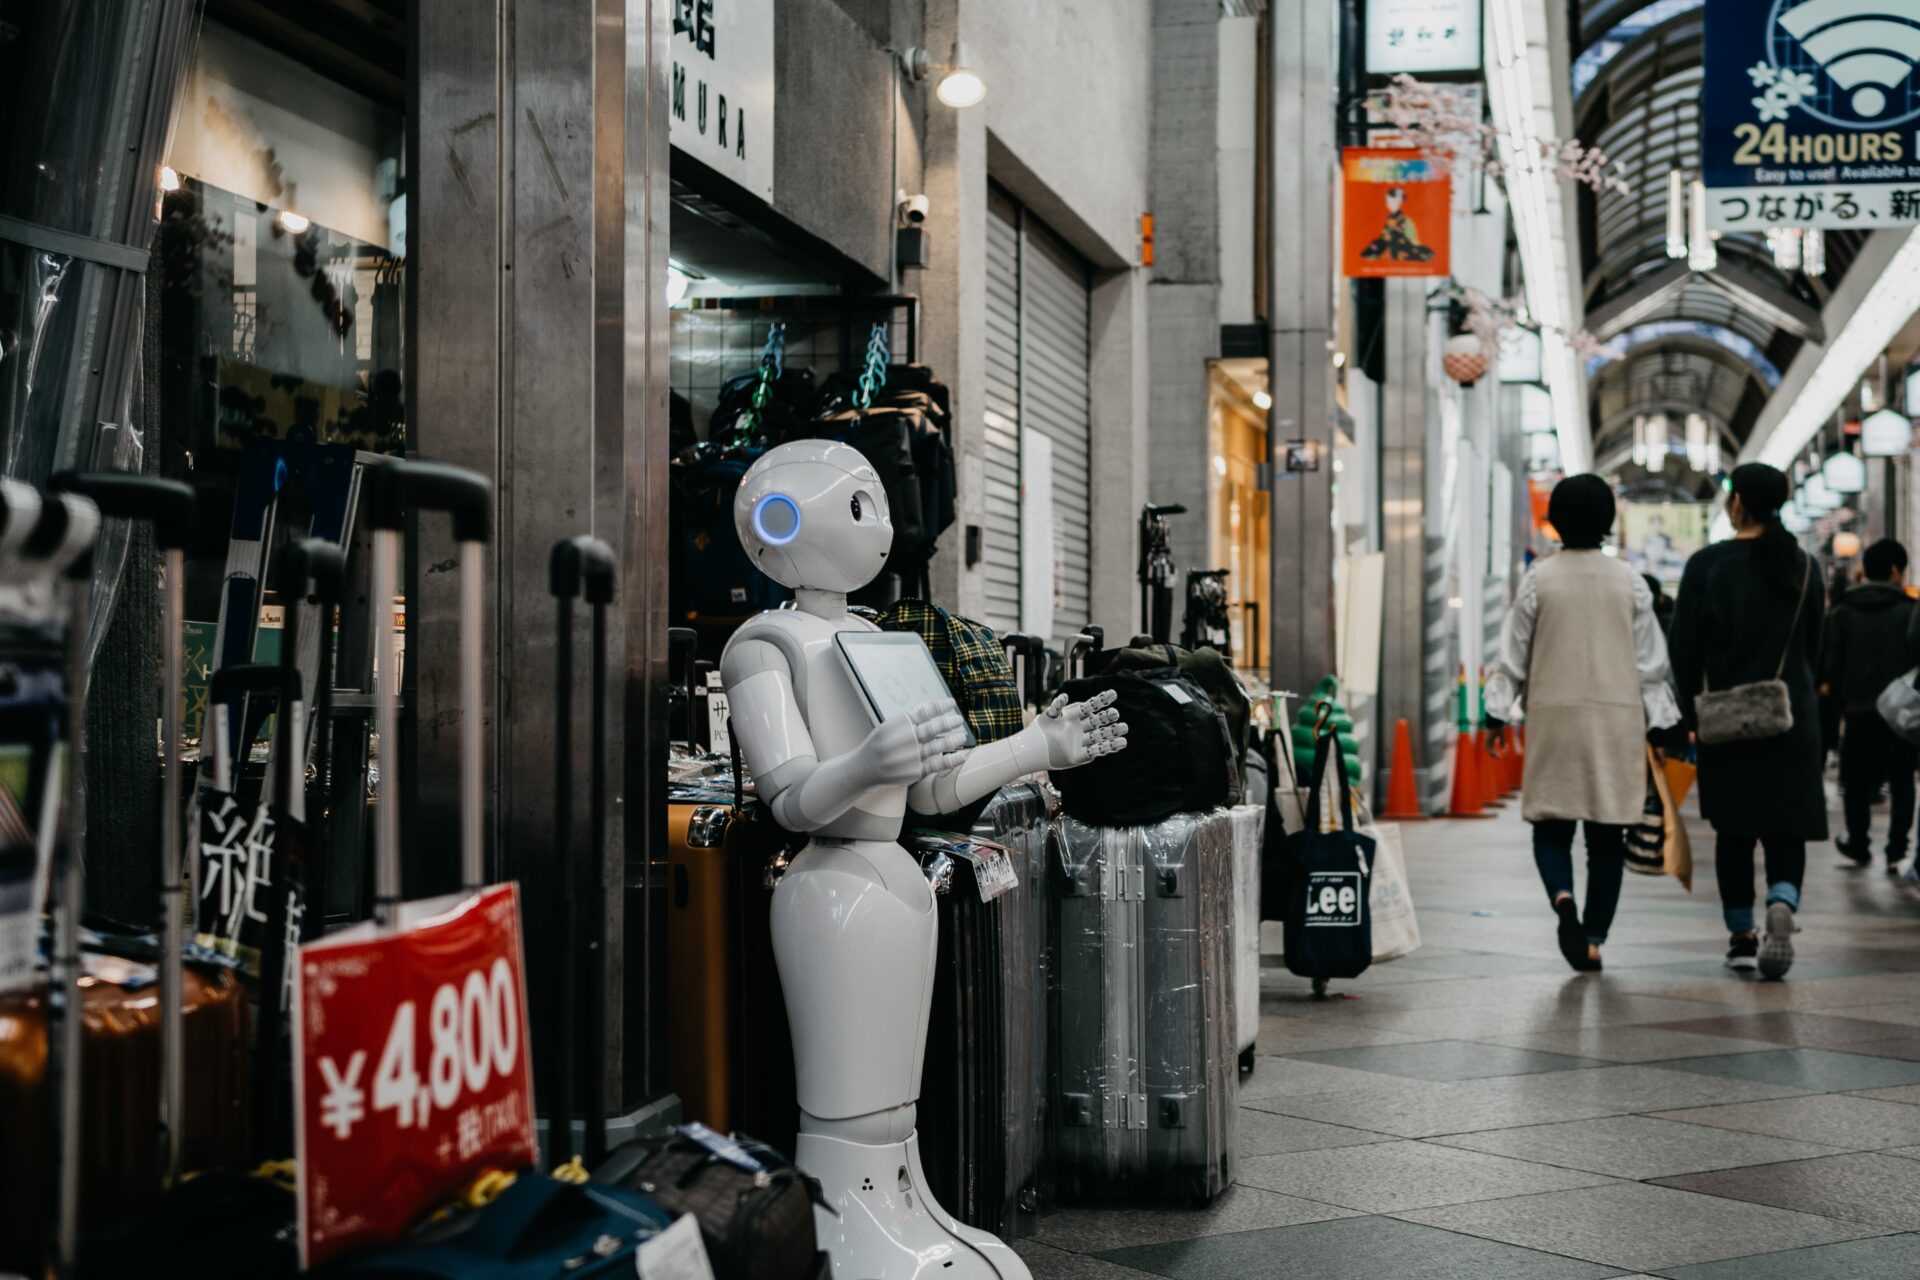 Discover the key differences between computers and robots in this comprehensive guide. Learn about their unique features and capabilities and how they impact our daily lives.